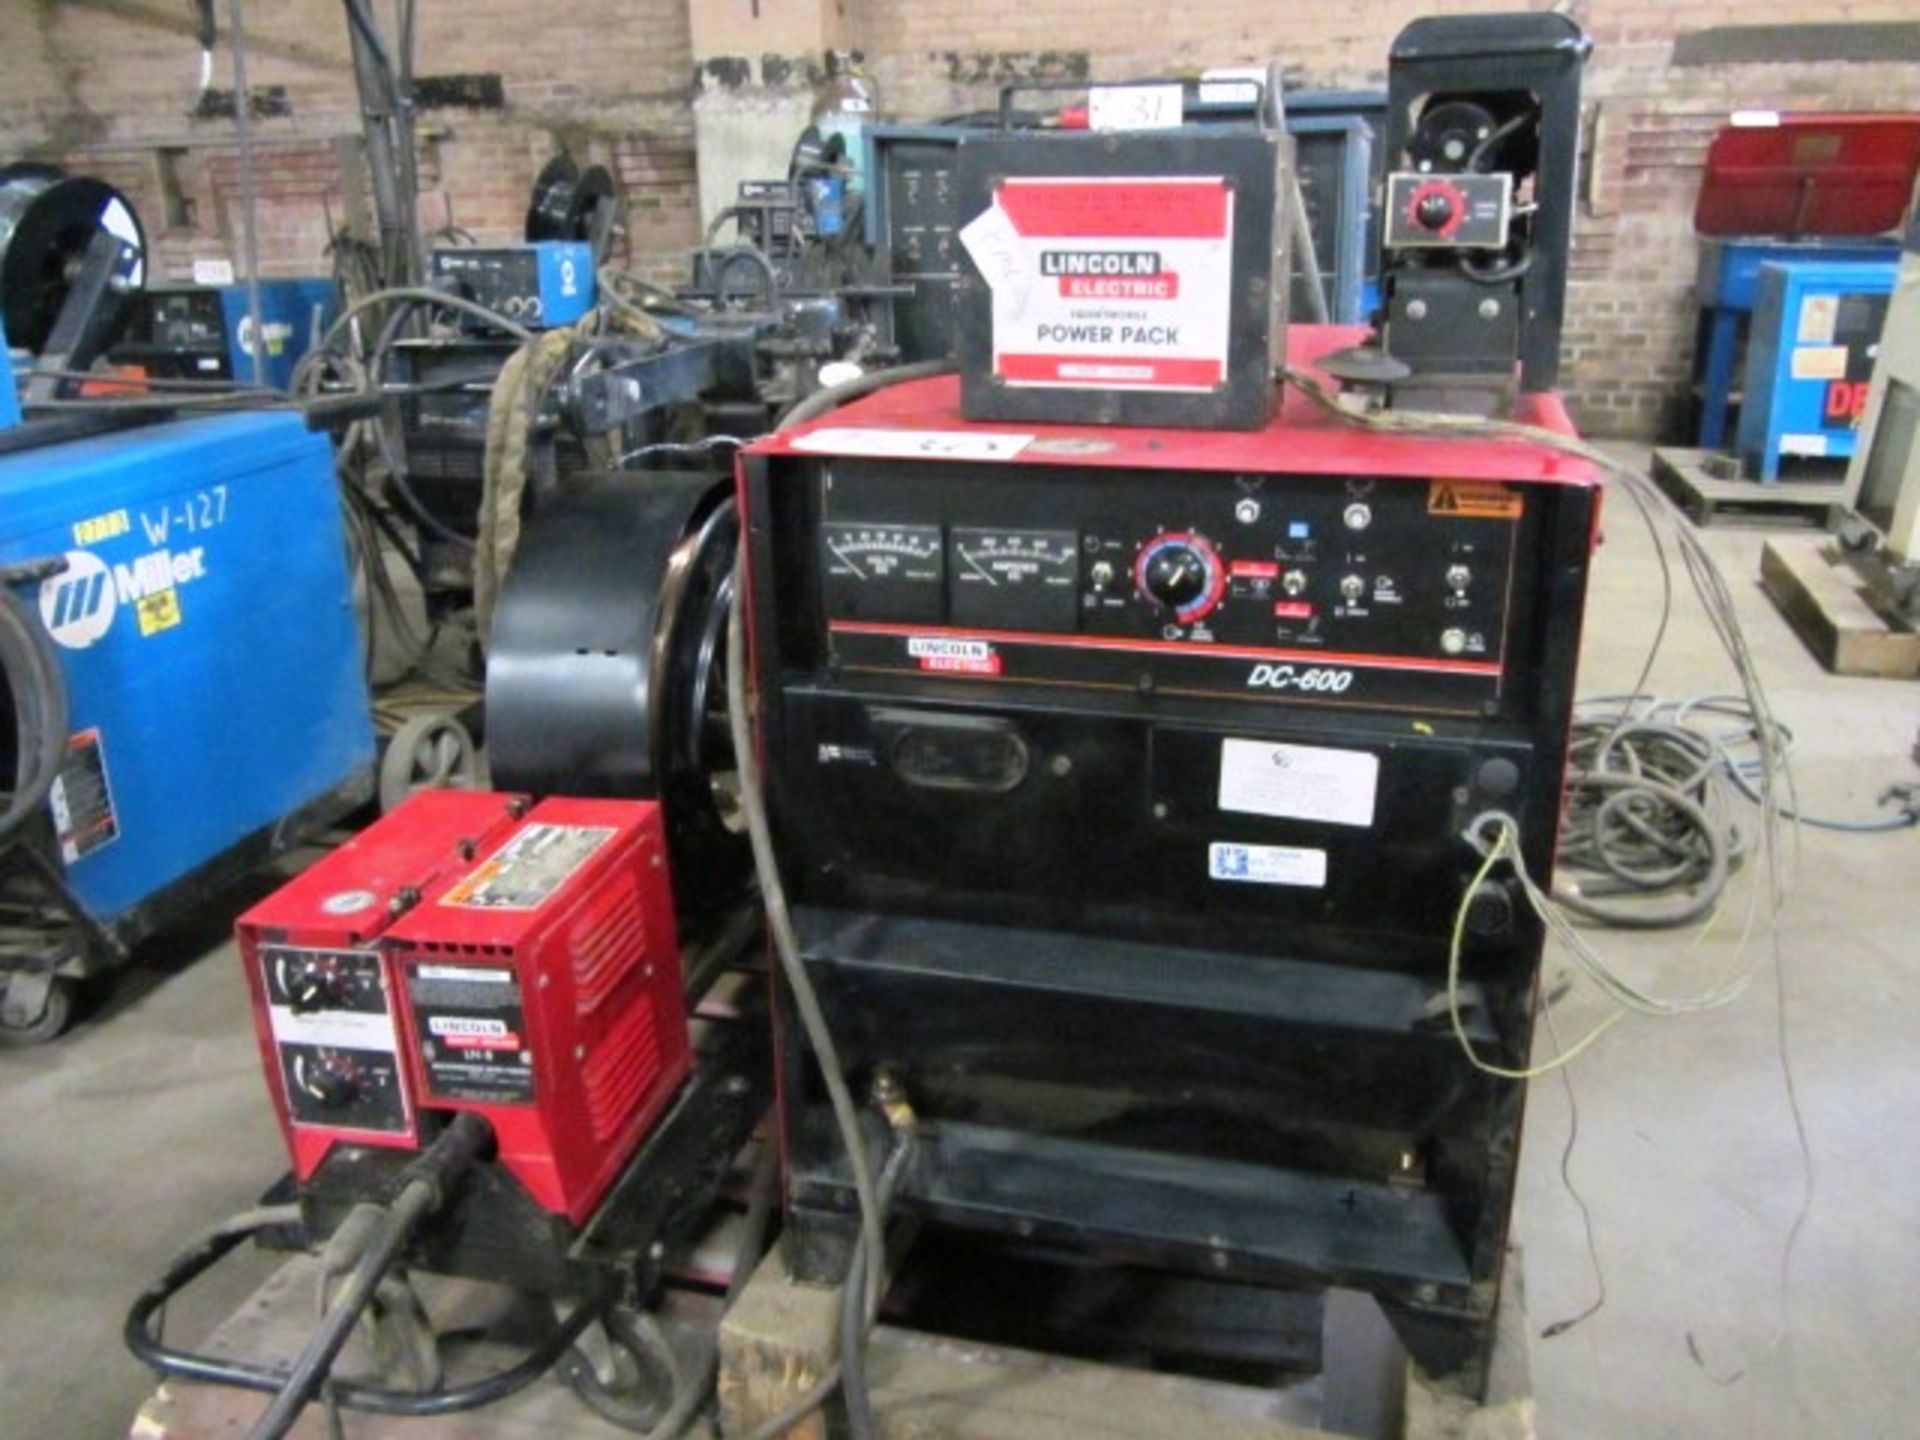 Lincoln DC600 Welder with LN-8 Multi-Process Wire Feeder, Flux Pot on Portable Cart, sn:U1070811579